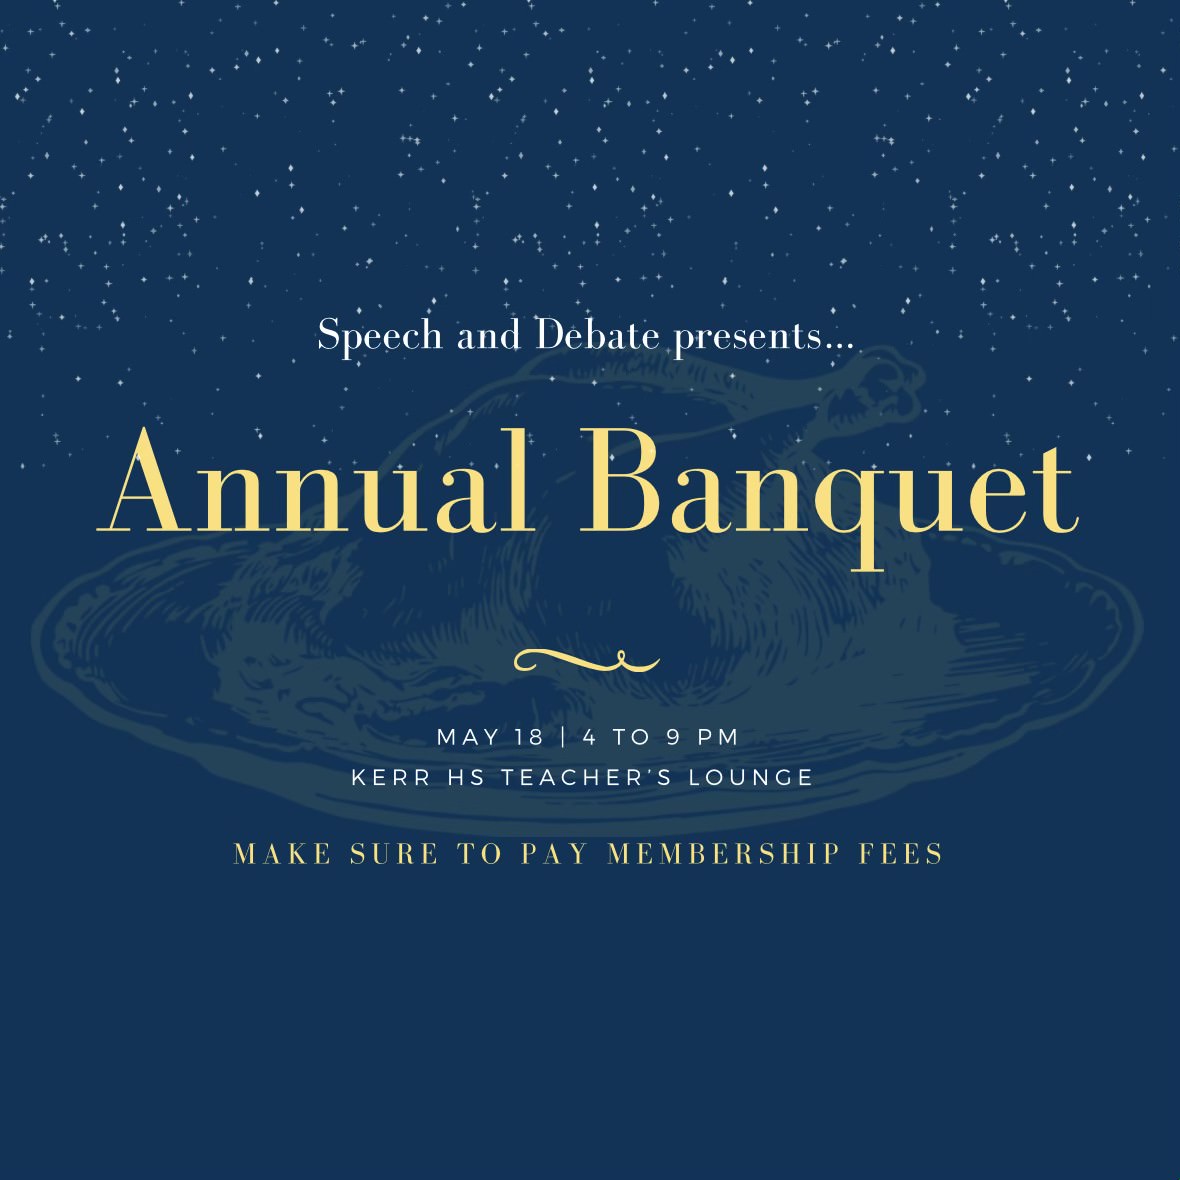 This is the official Speech and Debate Banquet Poster. It was designed by Historian Abigail Nguyen. 